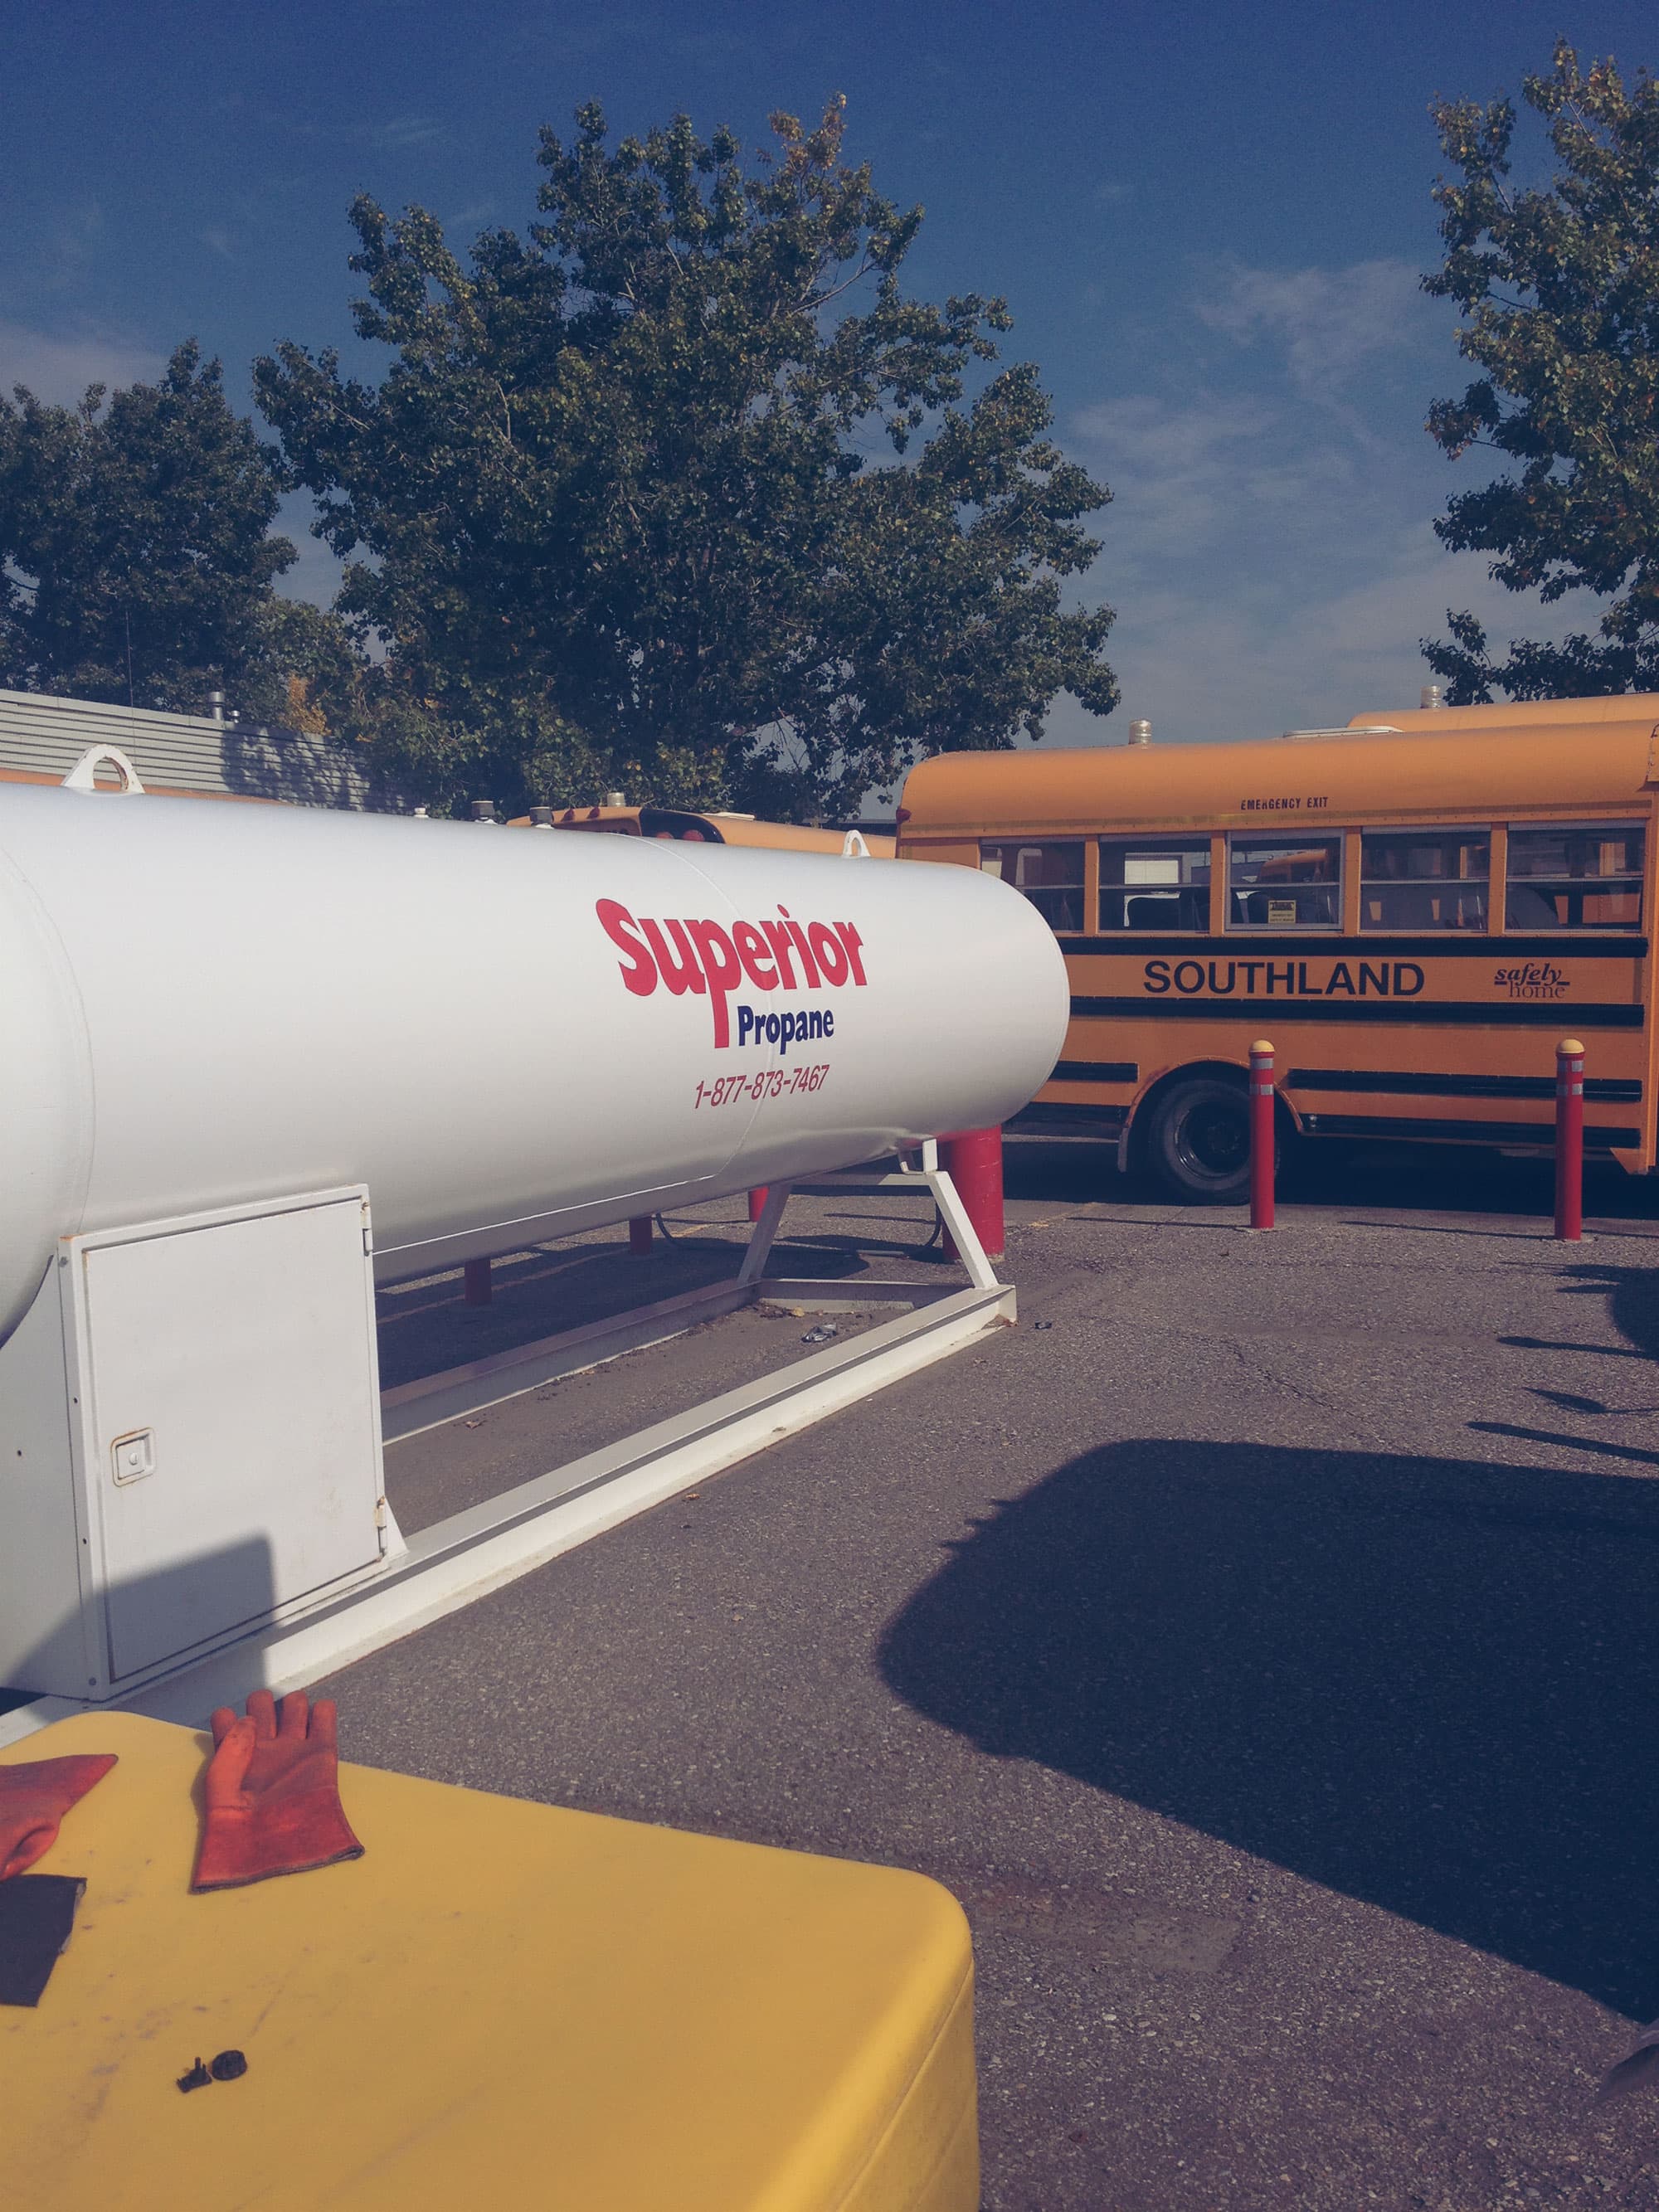 Superior Propane Auto Propane Fueling Station for a fleet of school buses